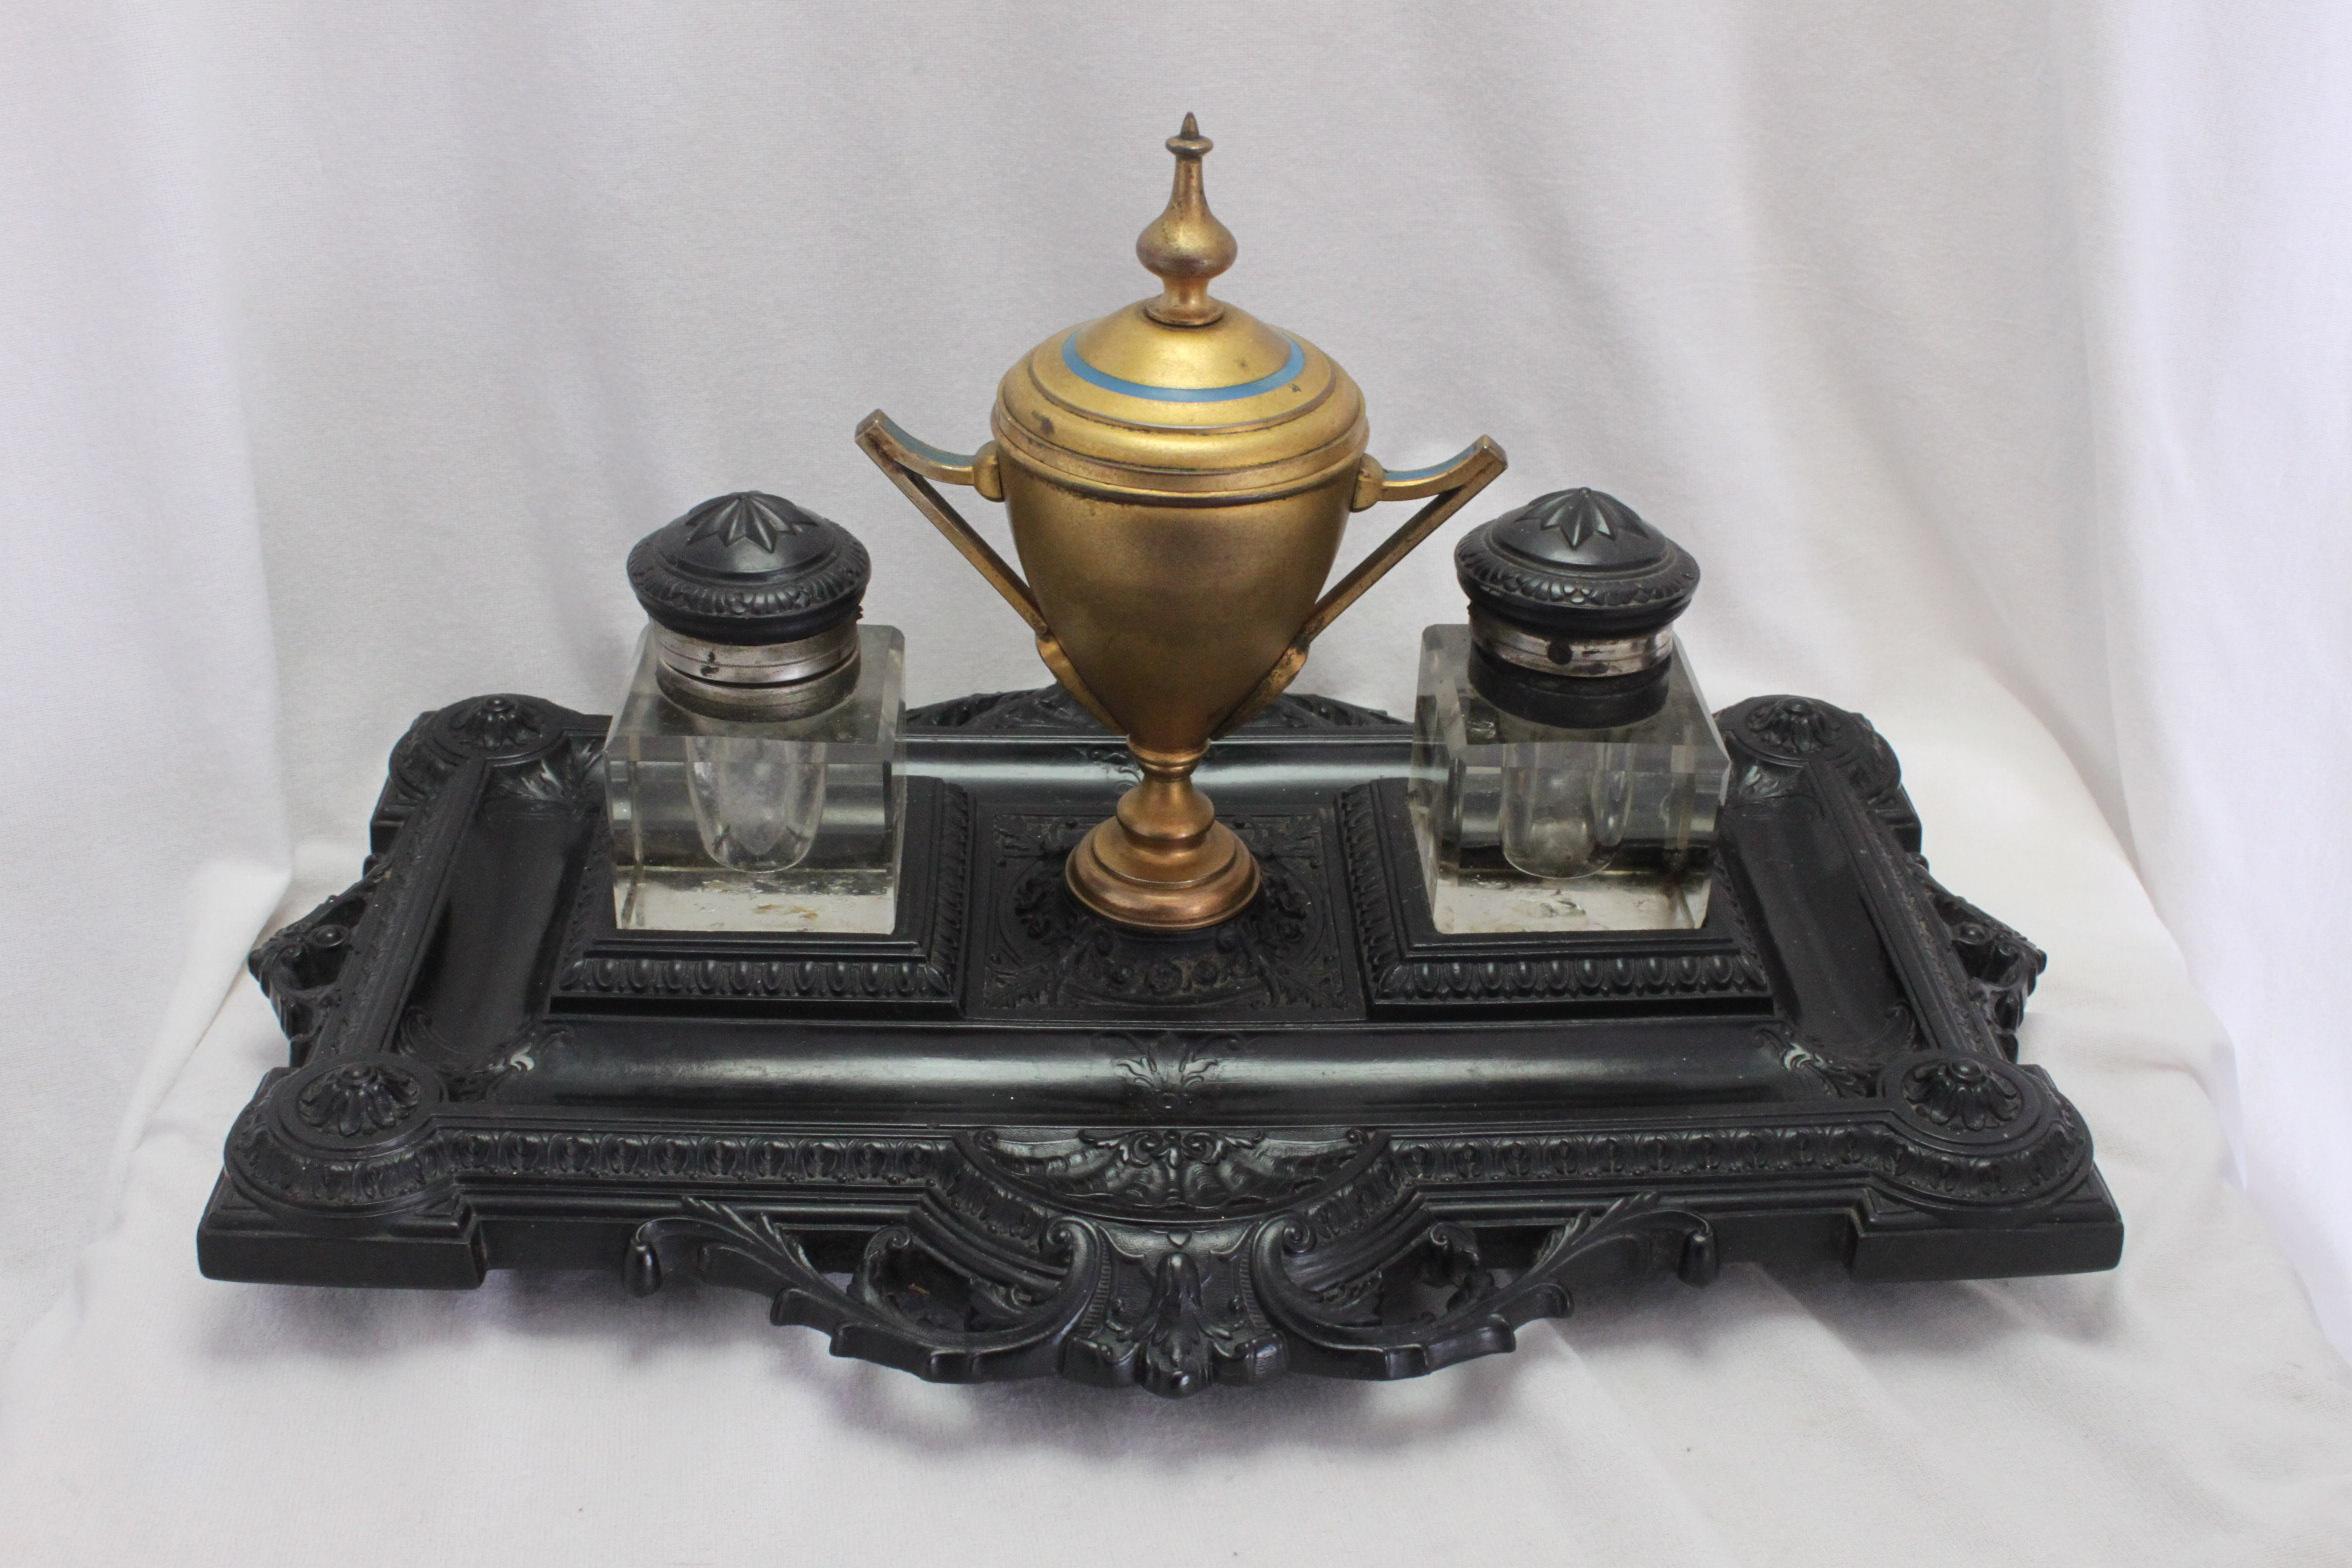 This large Bois Durci ink stand features an intricately moulded base, upon which sit two glass inkwells and a central urn shaped container. The glass inkwells are fitted with bois durci tops set into silver plated mounts and collars. The urn shaped